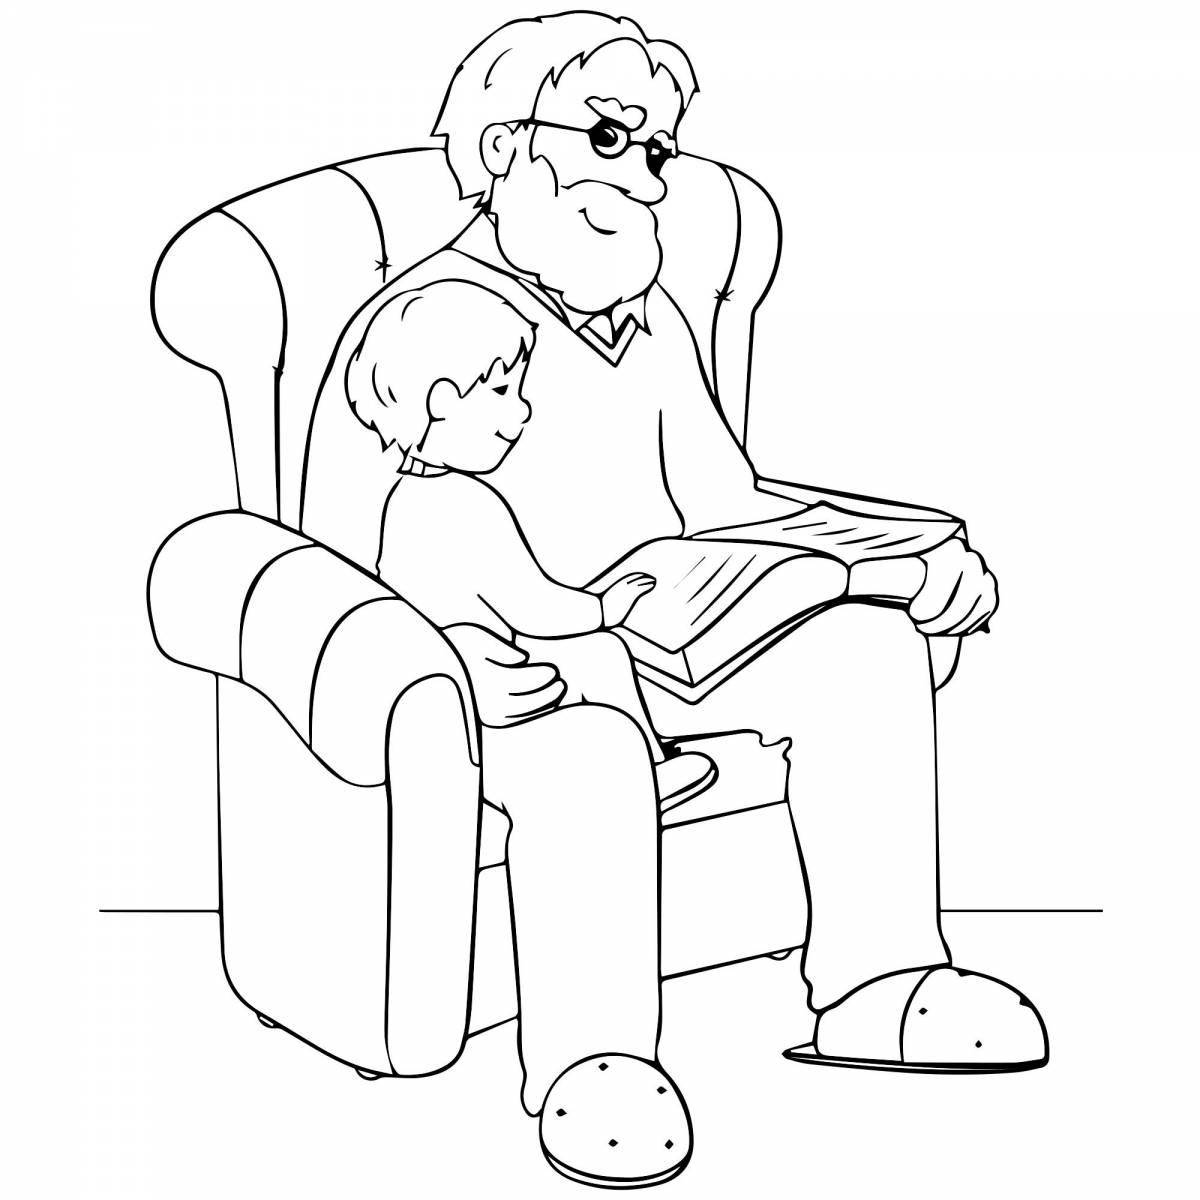 Amazing grandfather coloring book for kids